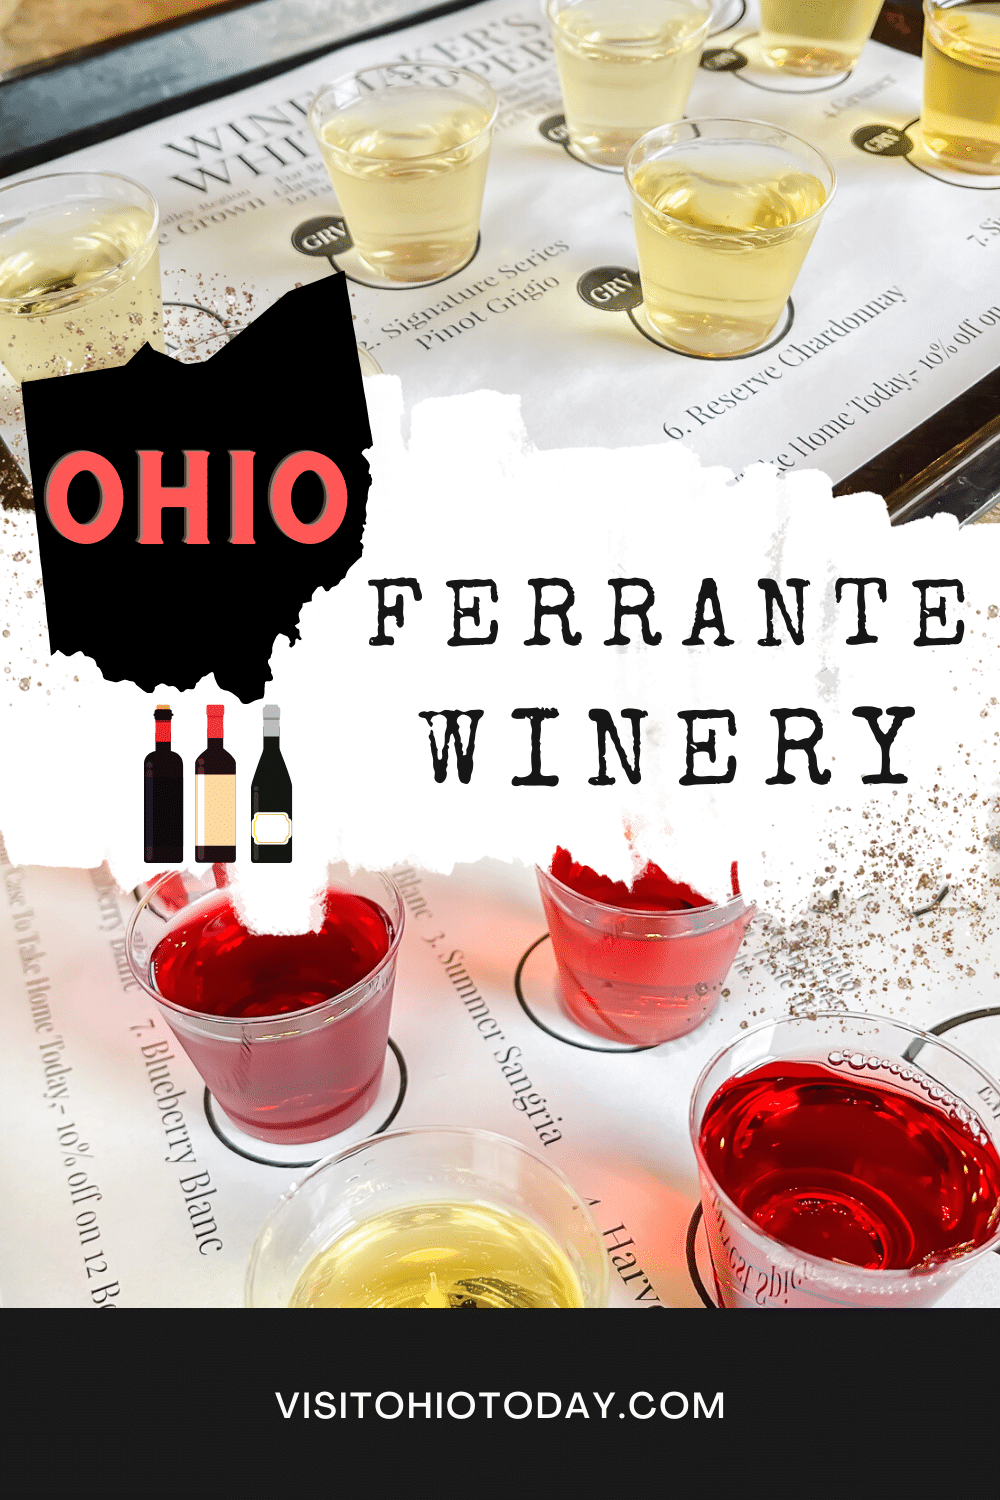 Ferrante Winery is an Ohio Winery located in Geneva, Ohio. The Ferrante Family has been producing award winning wines since 1937. #ferrantewinery #ohiowines #ohiowinery